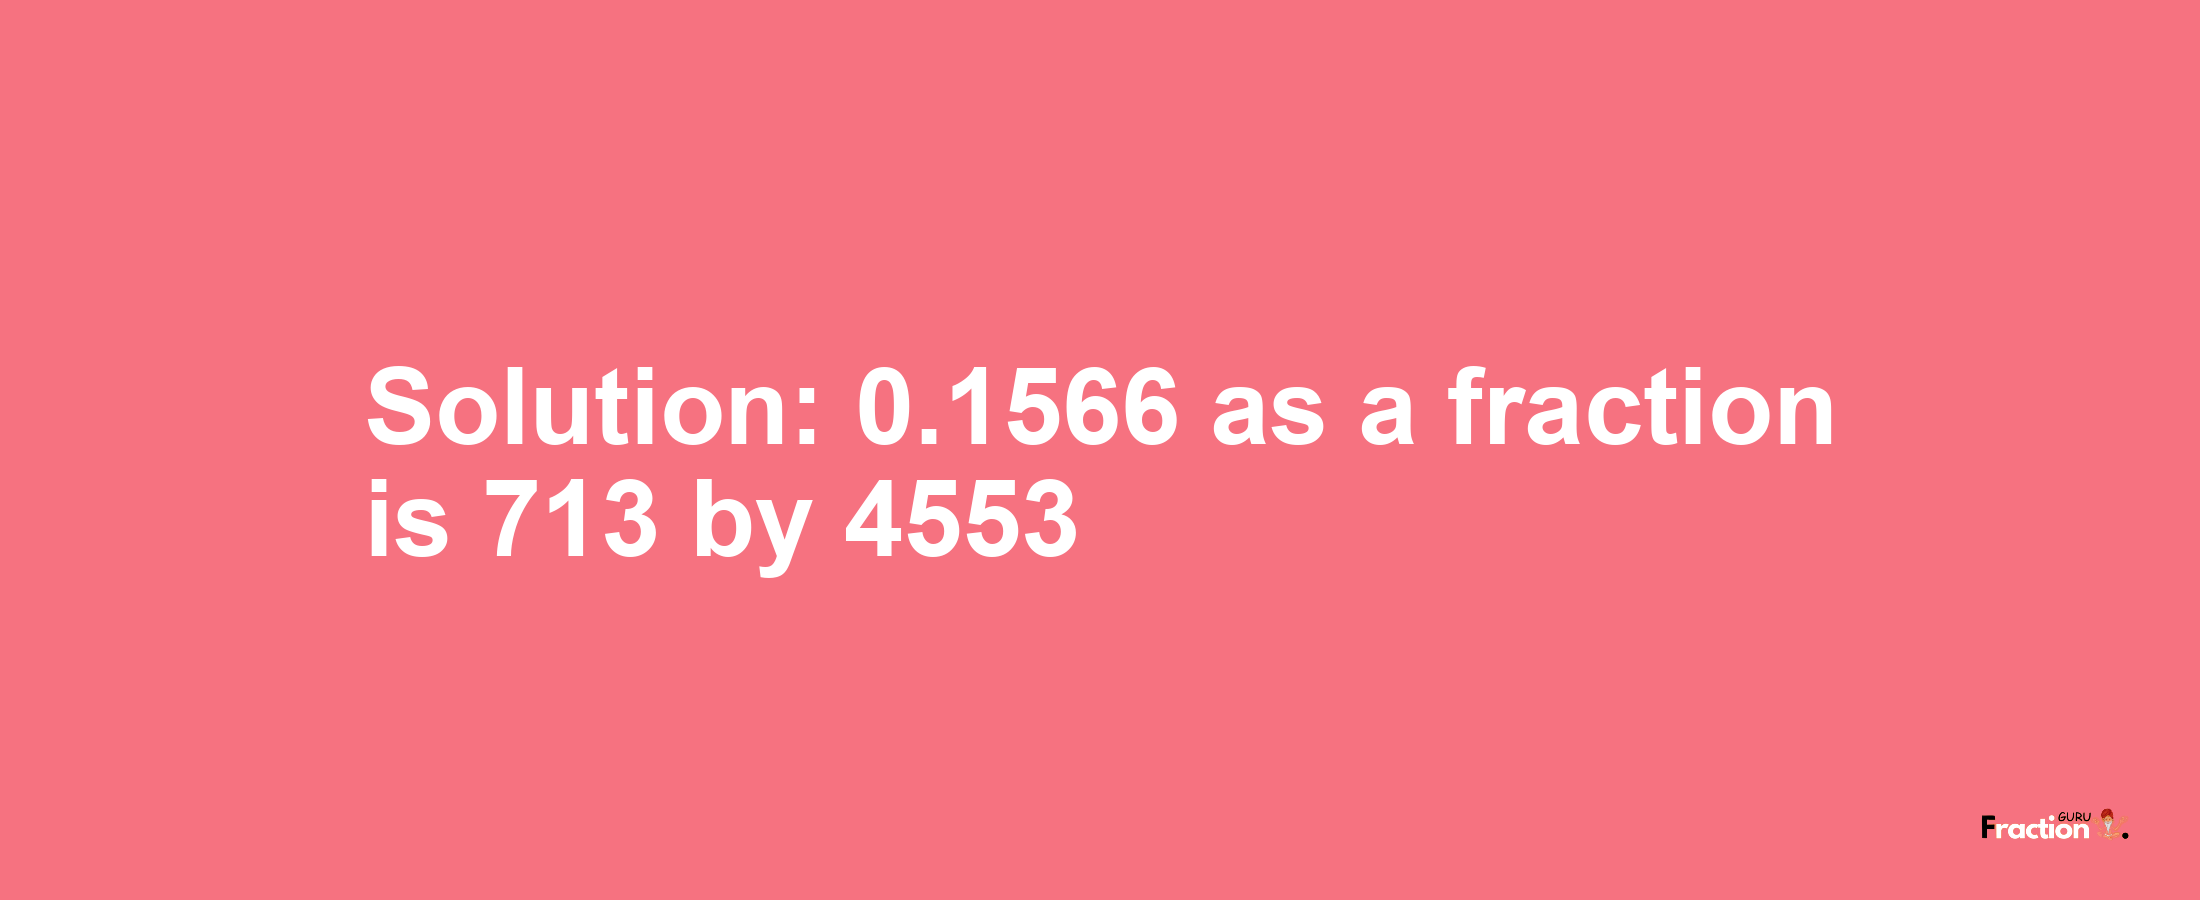 Solution:0.1566 as a fraction is 713/4553